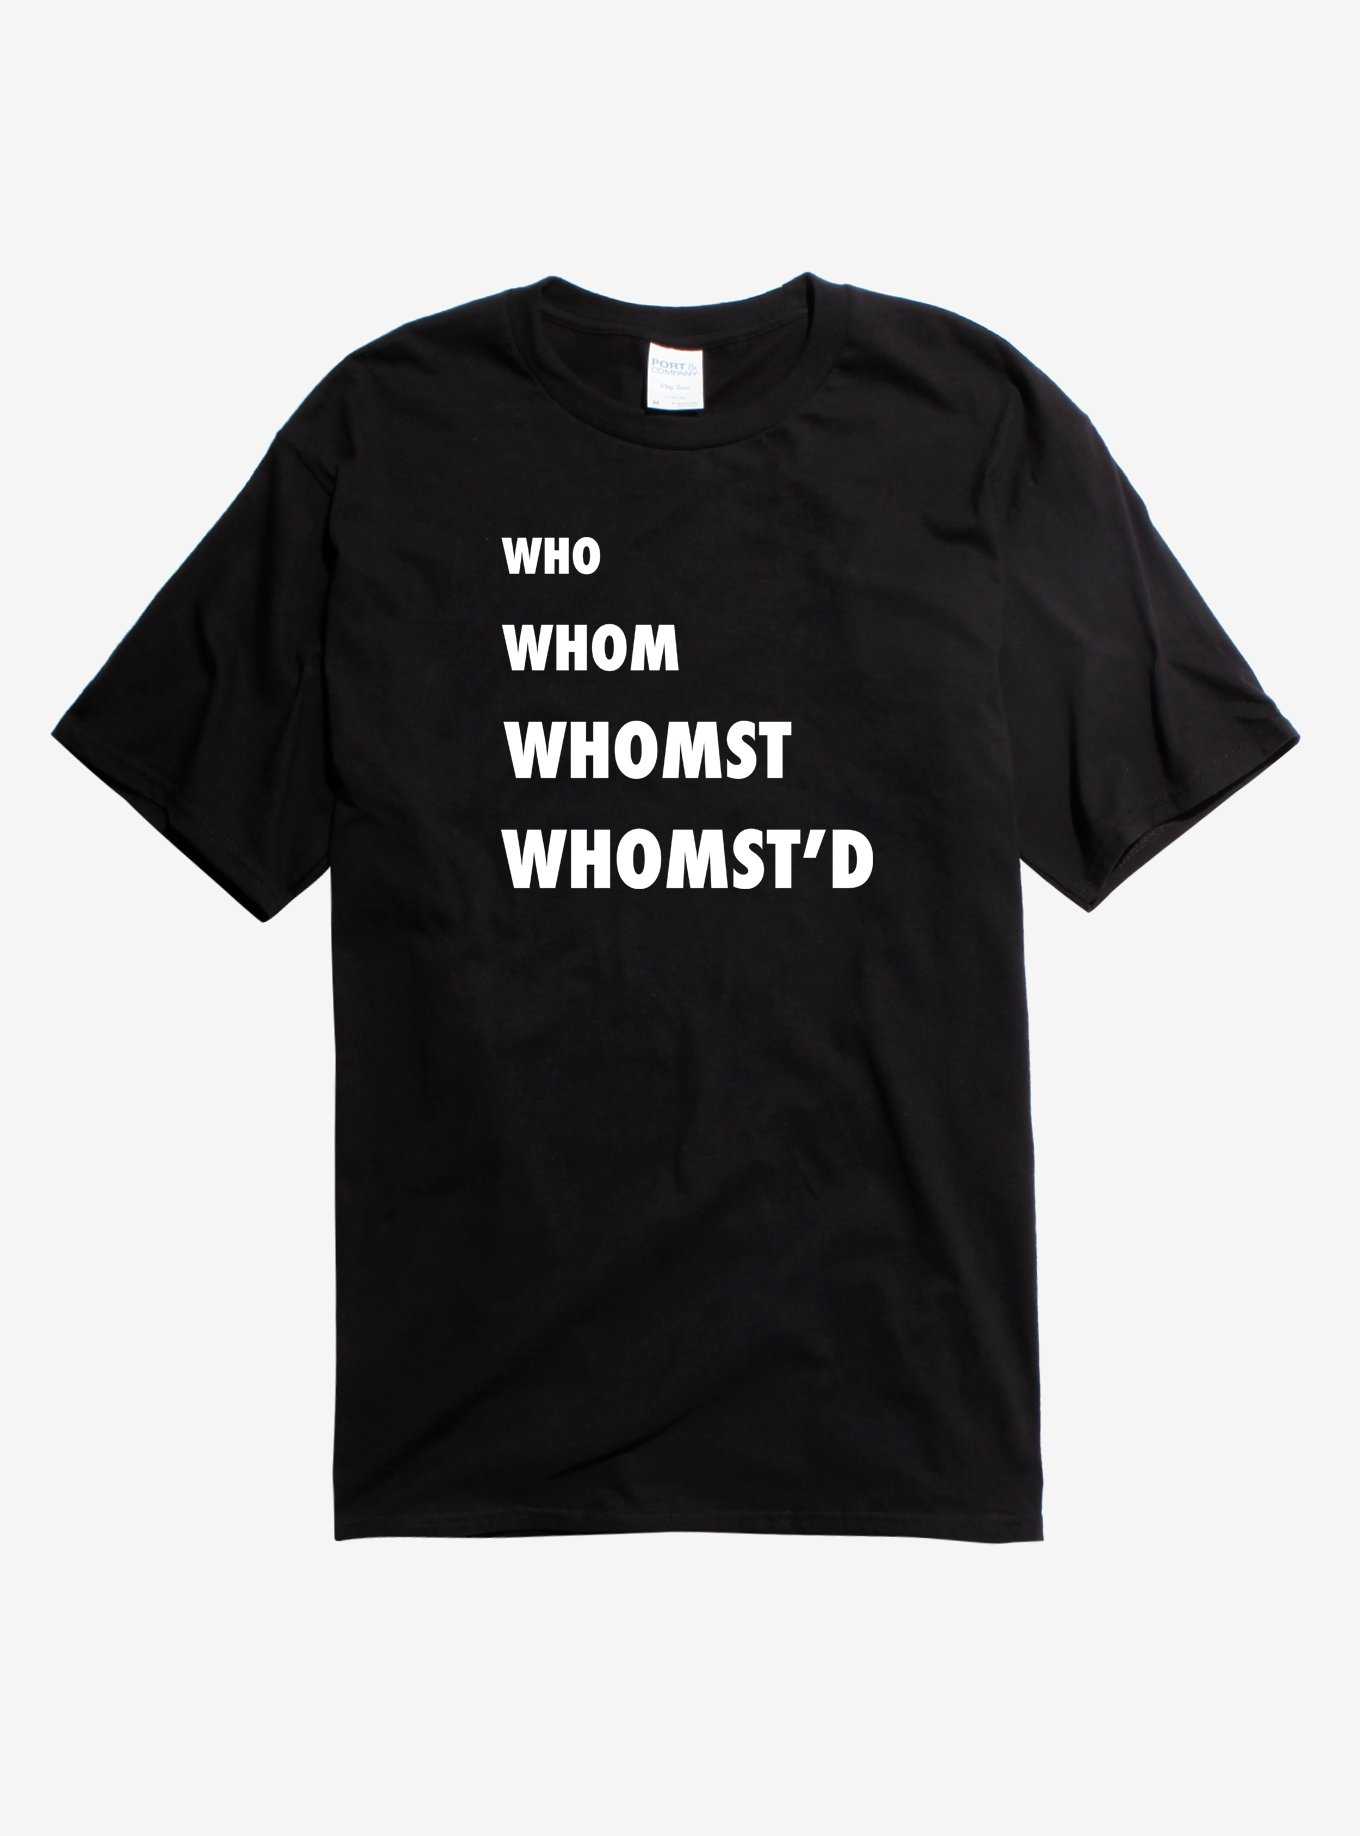 Who Whom Whomst Whomst'd T-Shirt, , hi-res